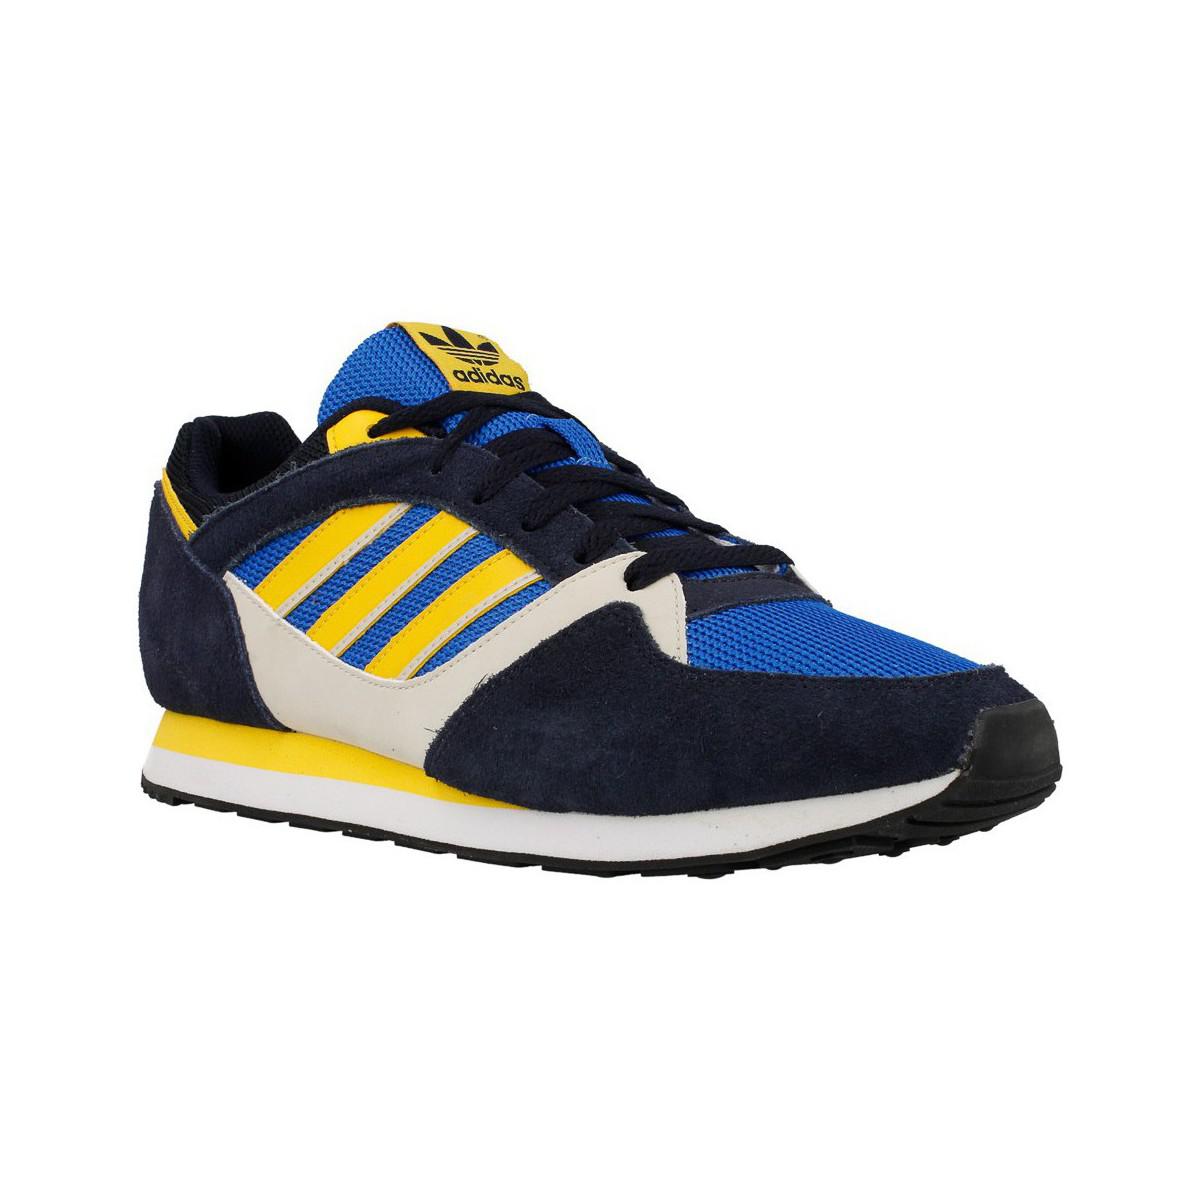 adidas zx 100 trainers